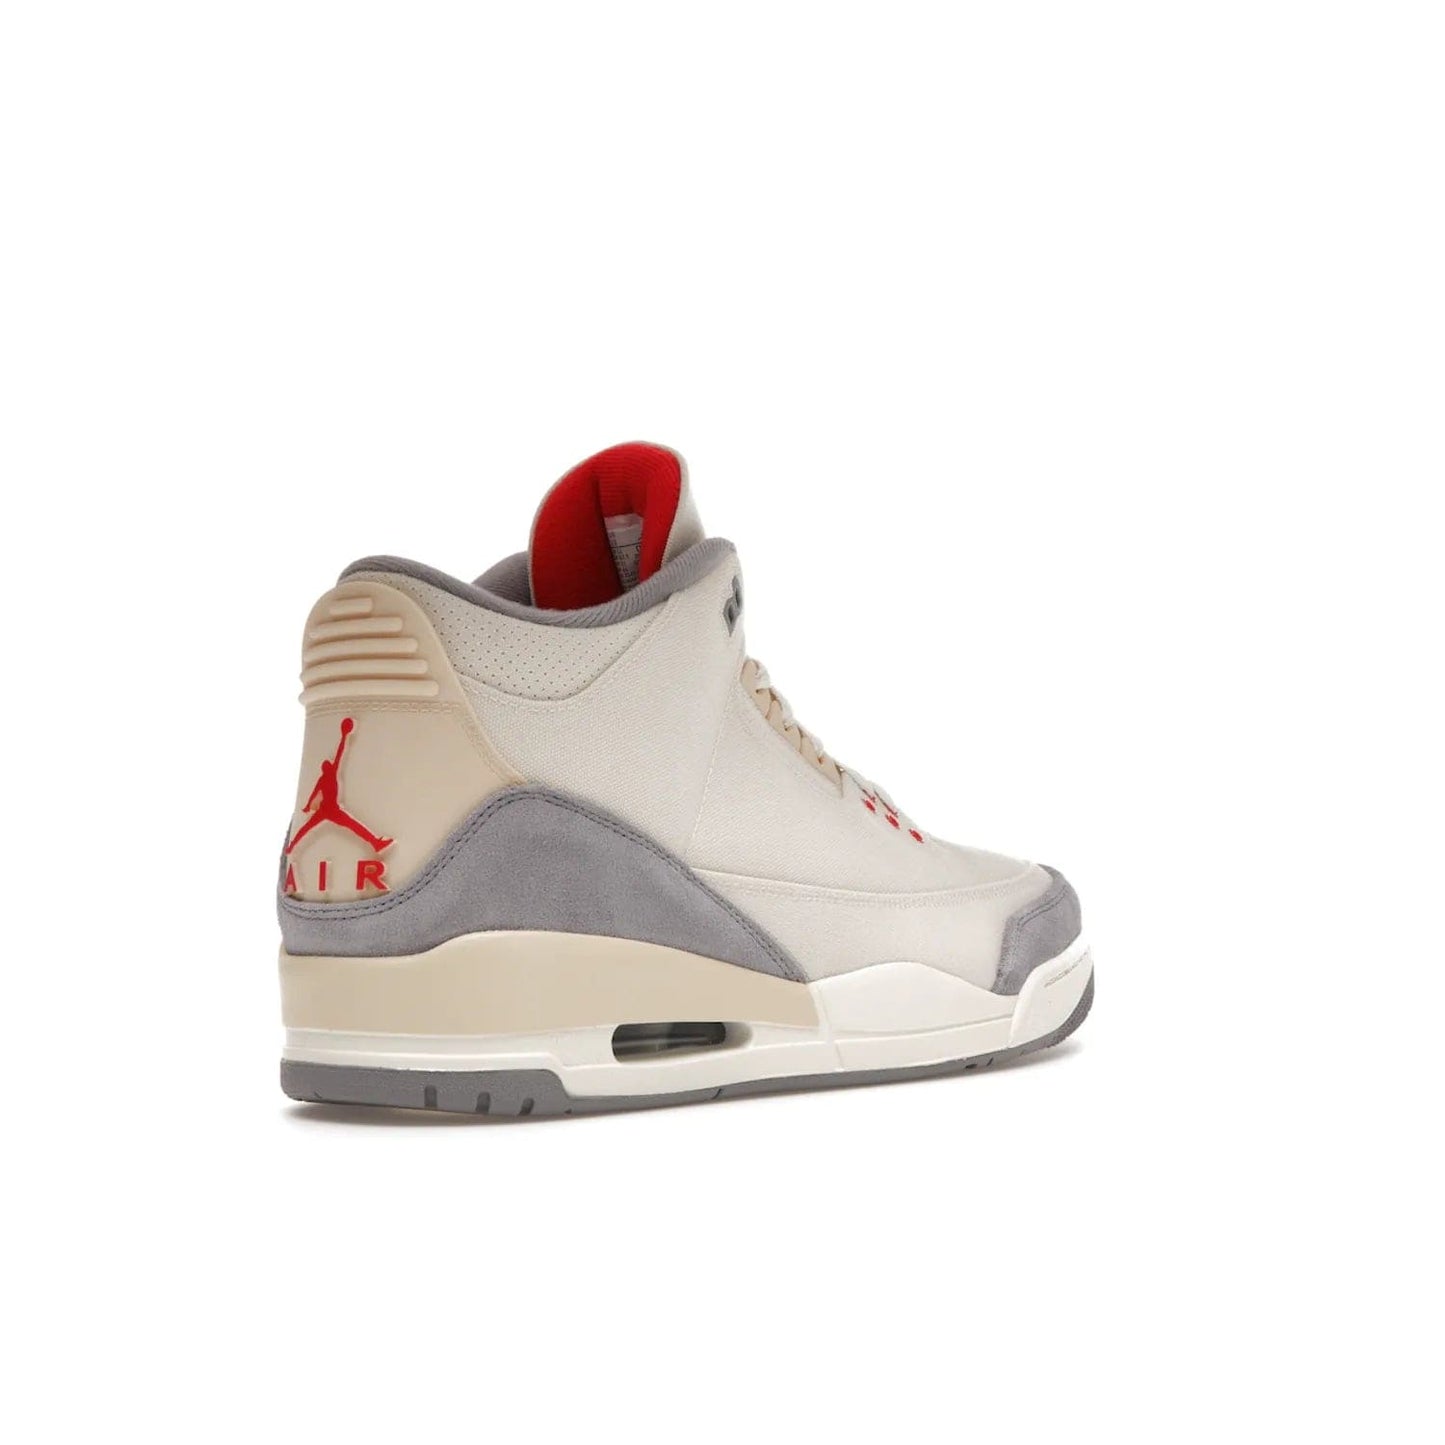 Jordan 3 Retro Muslin - Image 32 - Only at www.BallersClubKickz.com - Eye-catching Air Jordan 3 Retro Muslin in a neutral palette of grey, cream, and red. Featuring canvas upper, suede overlays and white/grey Air Max sole. Available in March 2022.